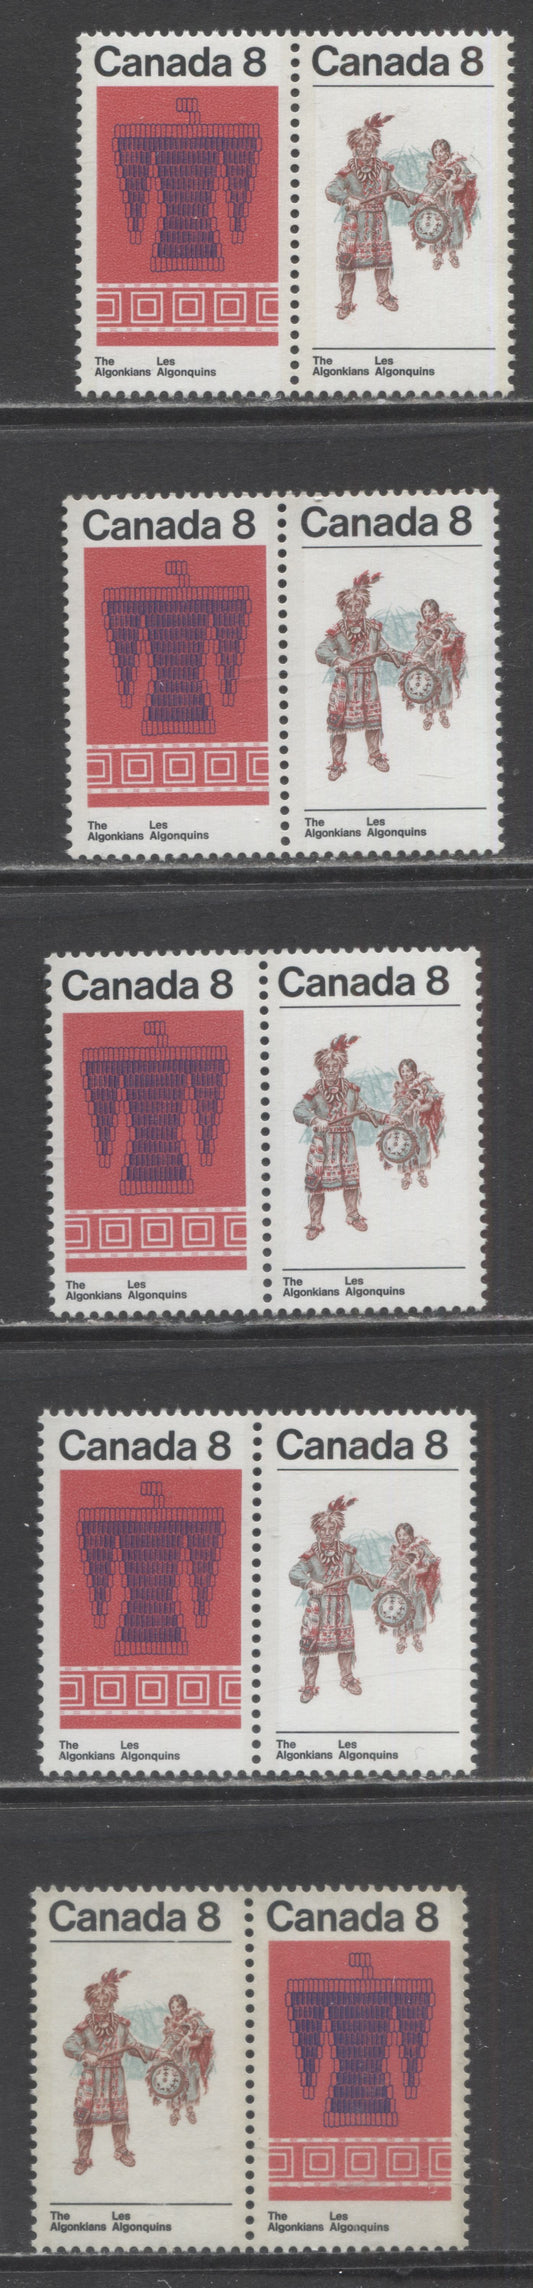 Lot 82 Canada #569a,ai 8c Multicolored Thunderbird & Belt And Algonkian Couple, 1973 Algonkian Indian Issue, 5 VFNH Horizontal Pairs On Different Papers, Including Transparant HB